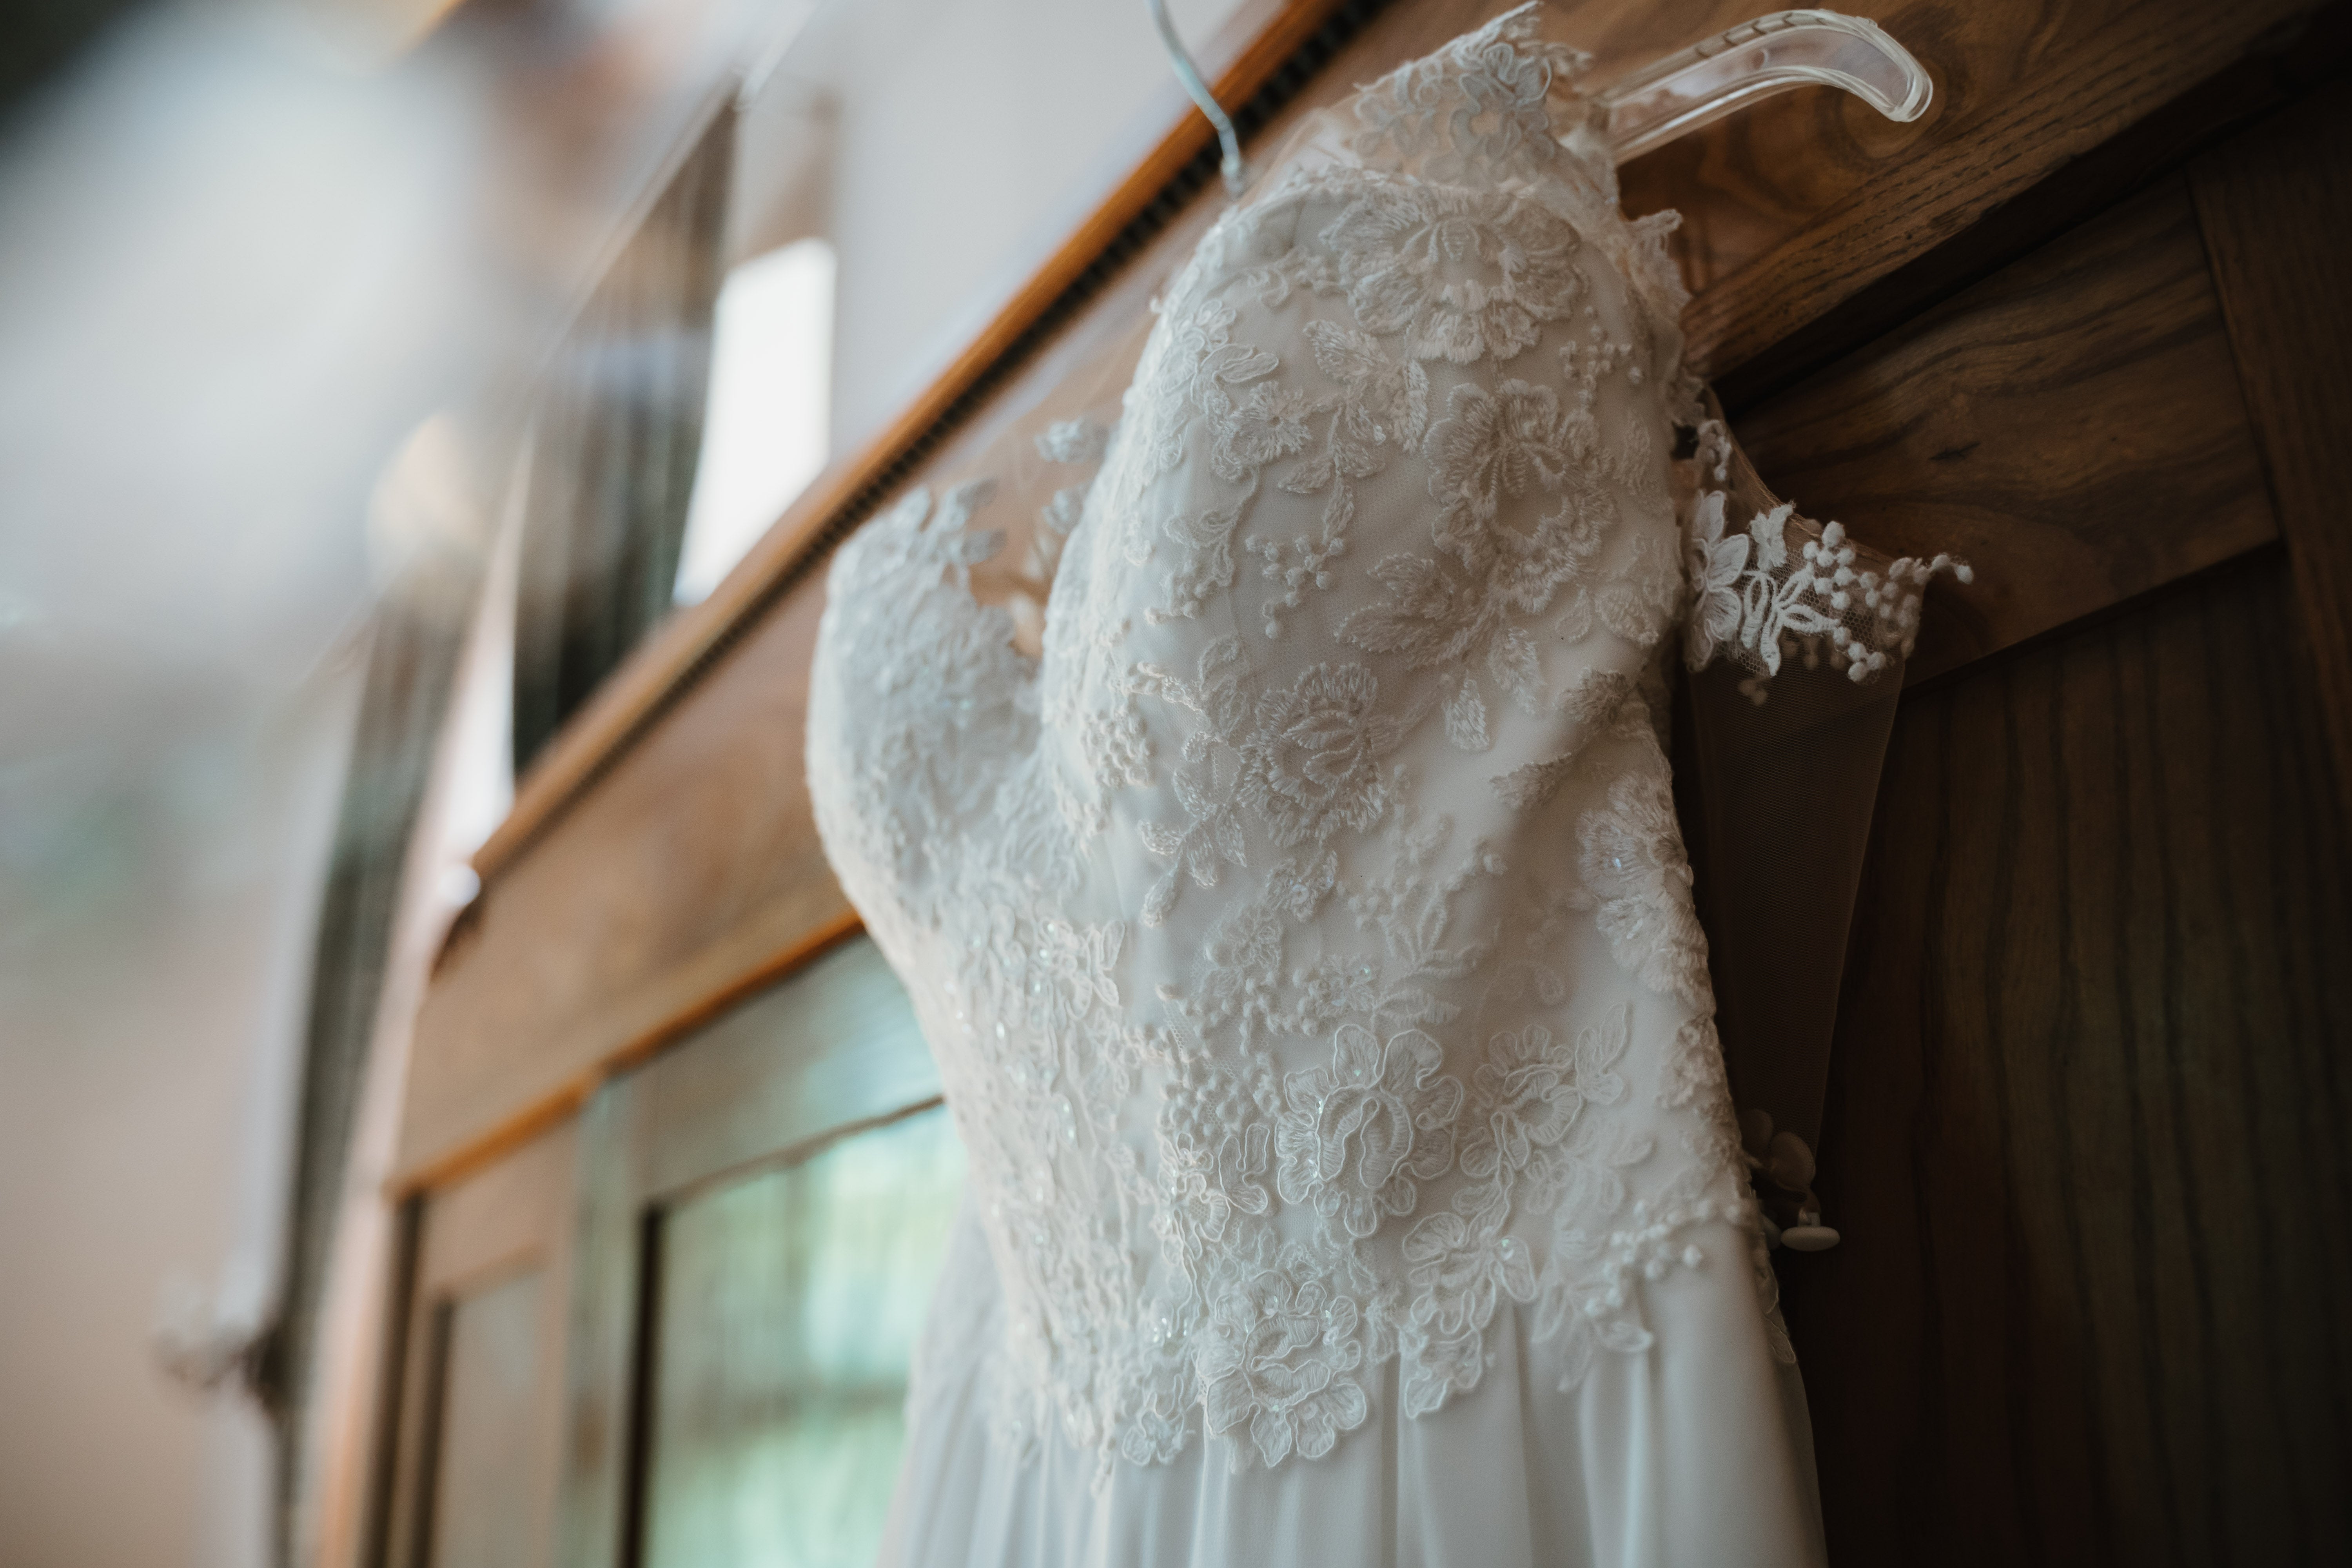 Woman reveals stepdaughter asked her to wear late daughter’s wedding dress